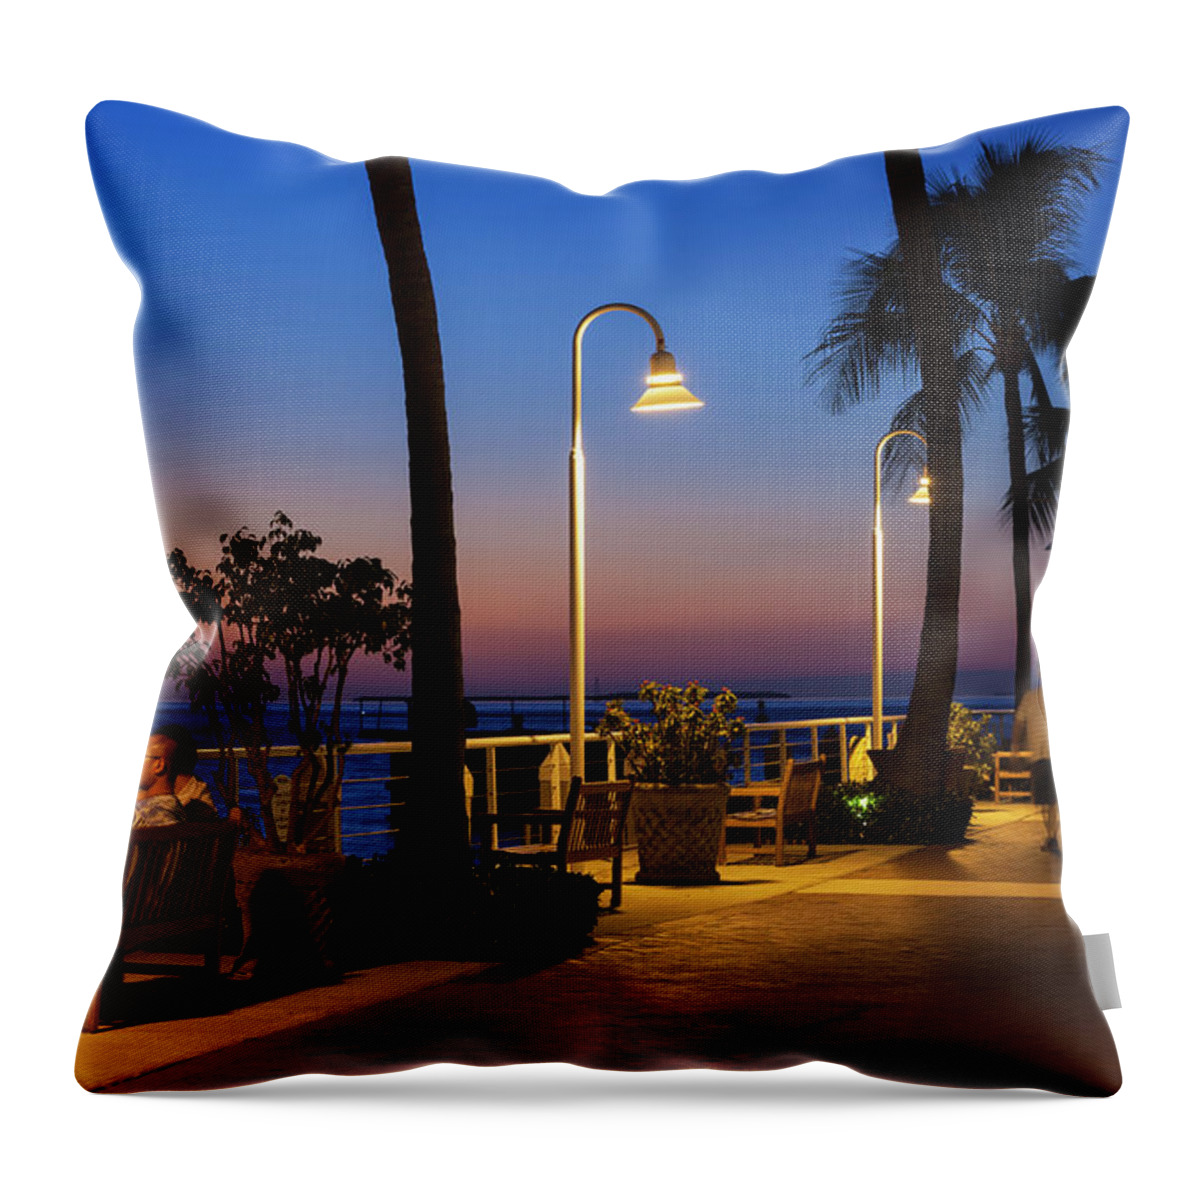 East Throw Pillow featuring the photograph Key West, Florida, Exterior View by Walter Bibikow